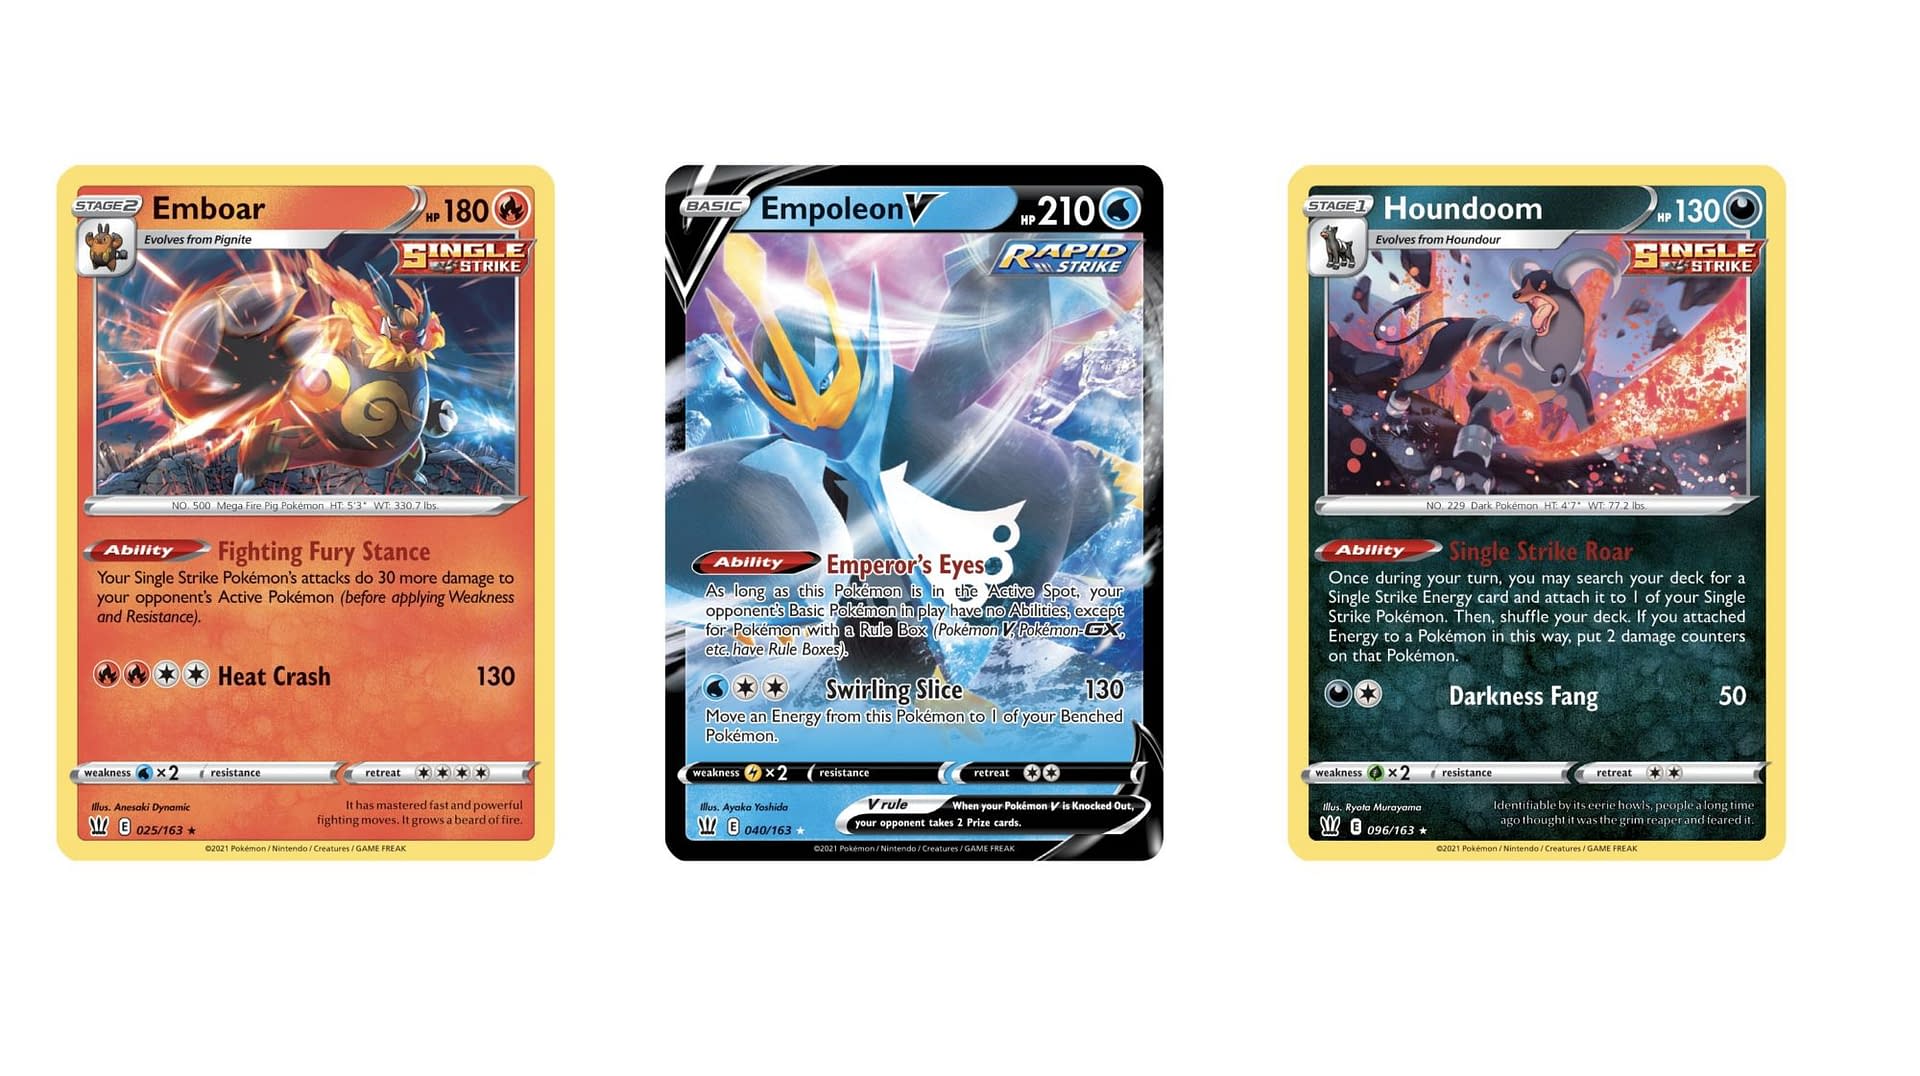 Preview The Cards Of The New Pokemon Tcg Battle Styles Expansion